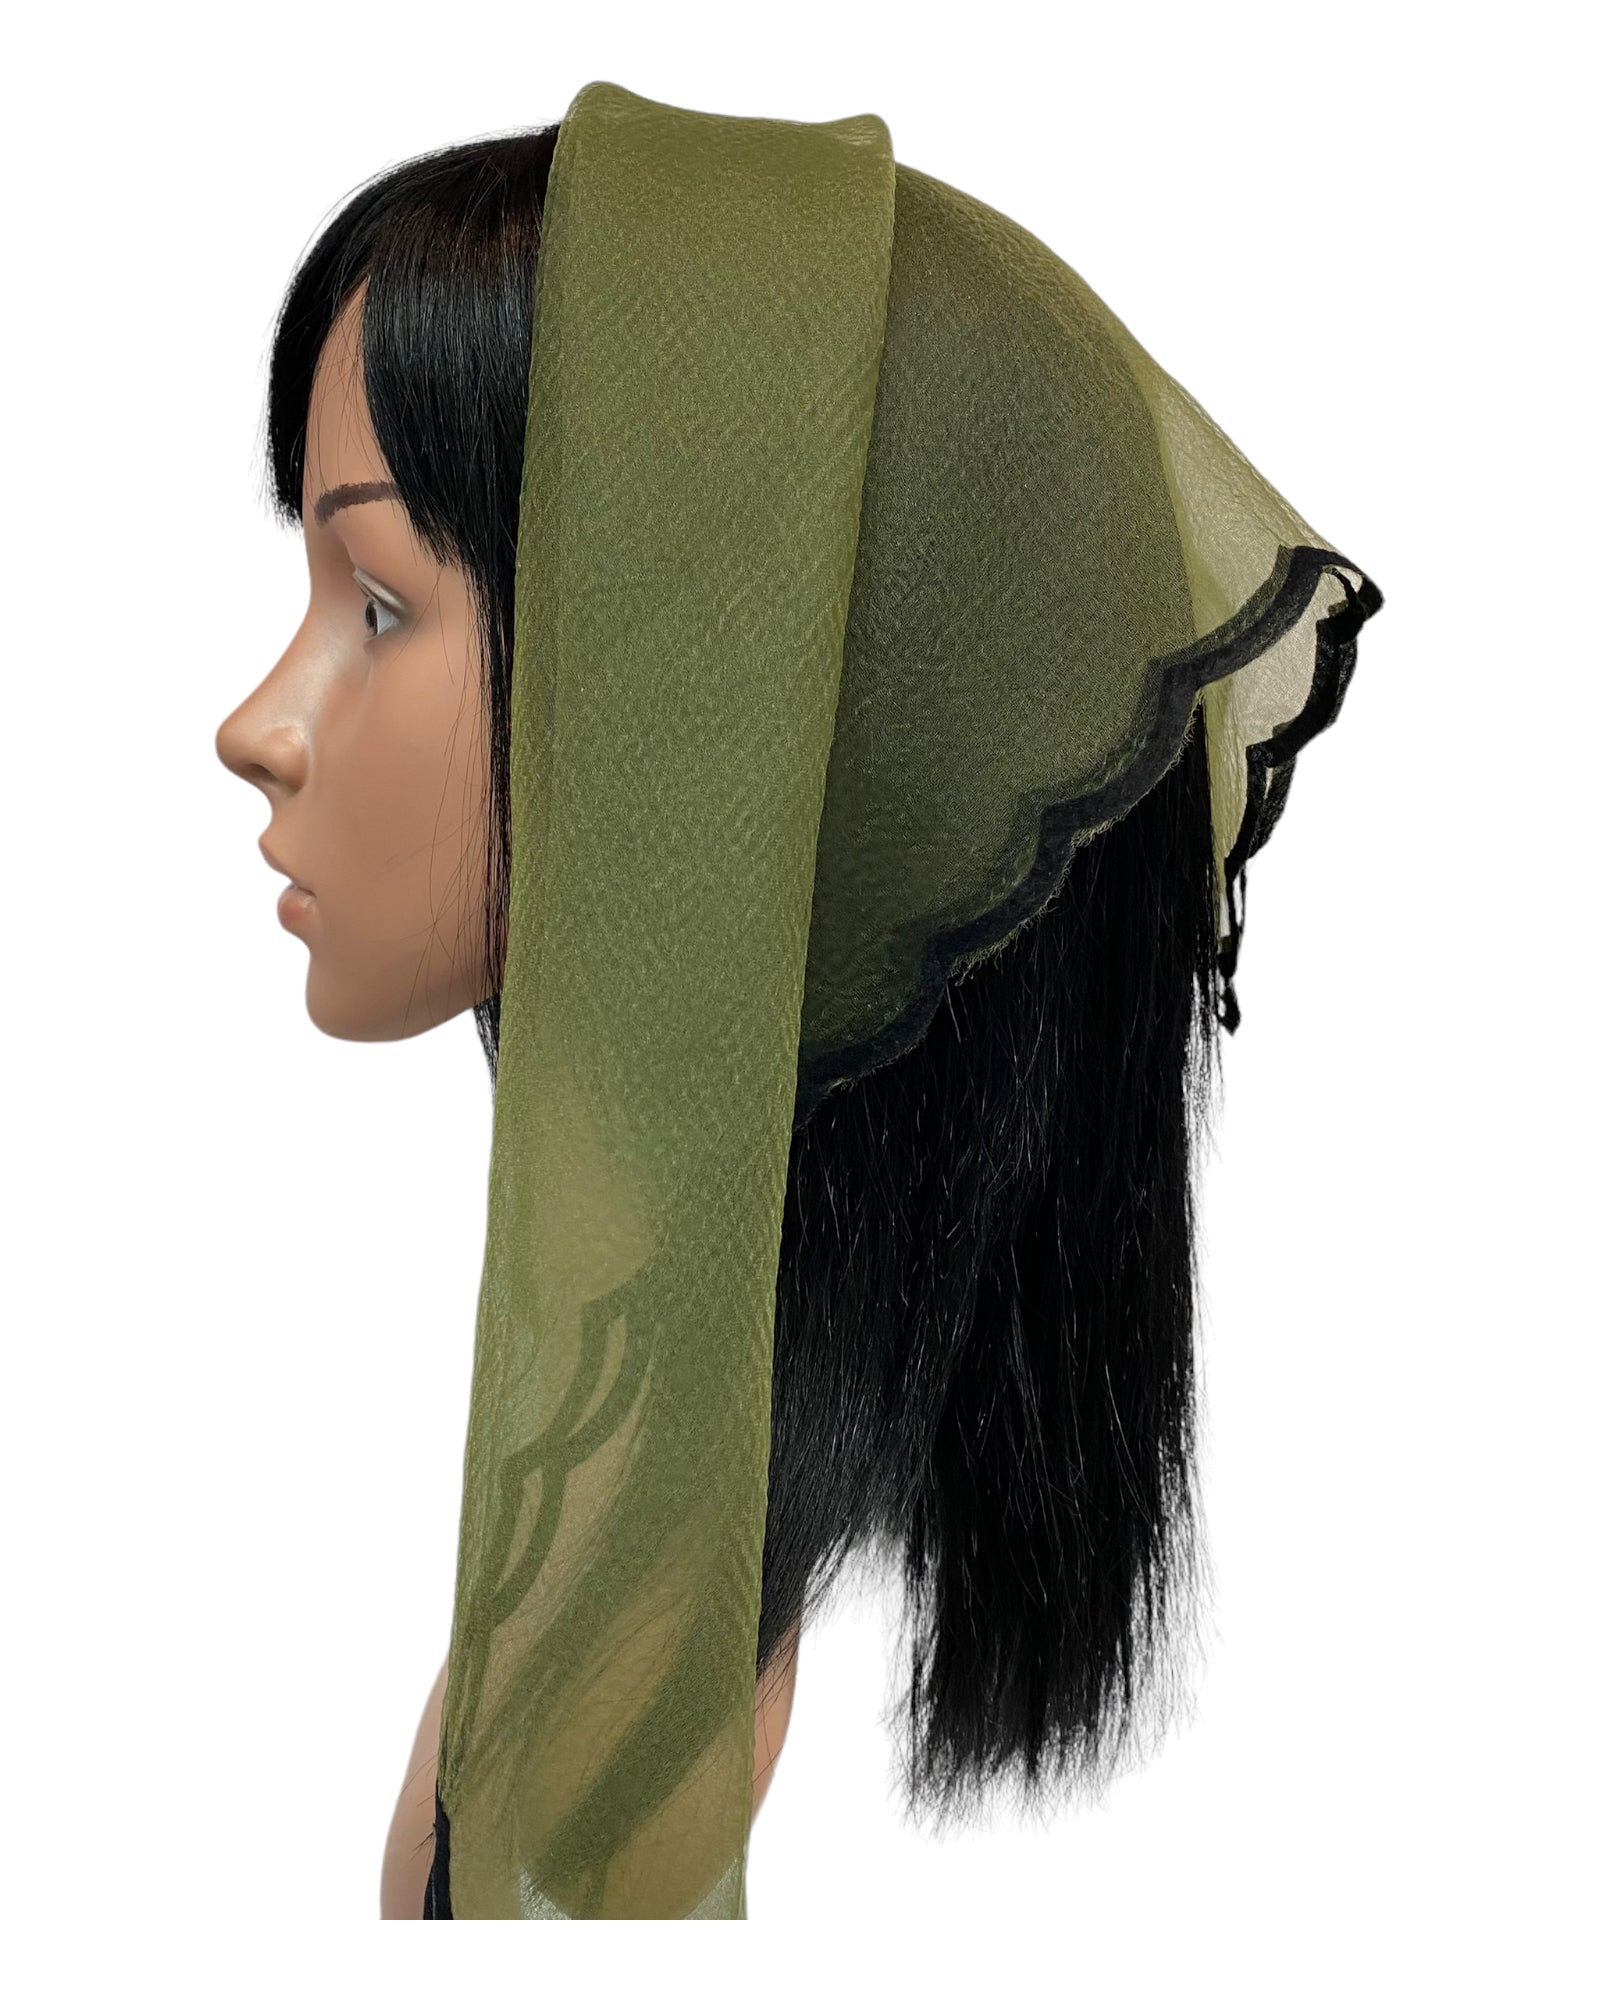 Solid | Zig-Zag | Olive Green with Black Edges